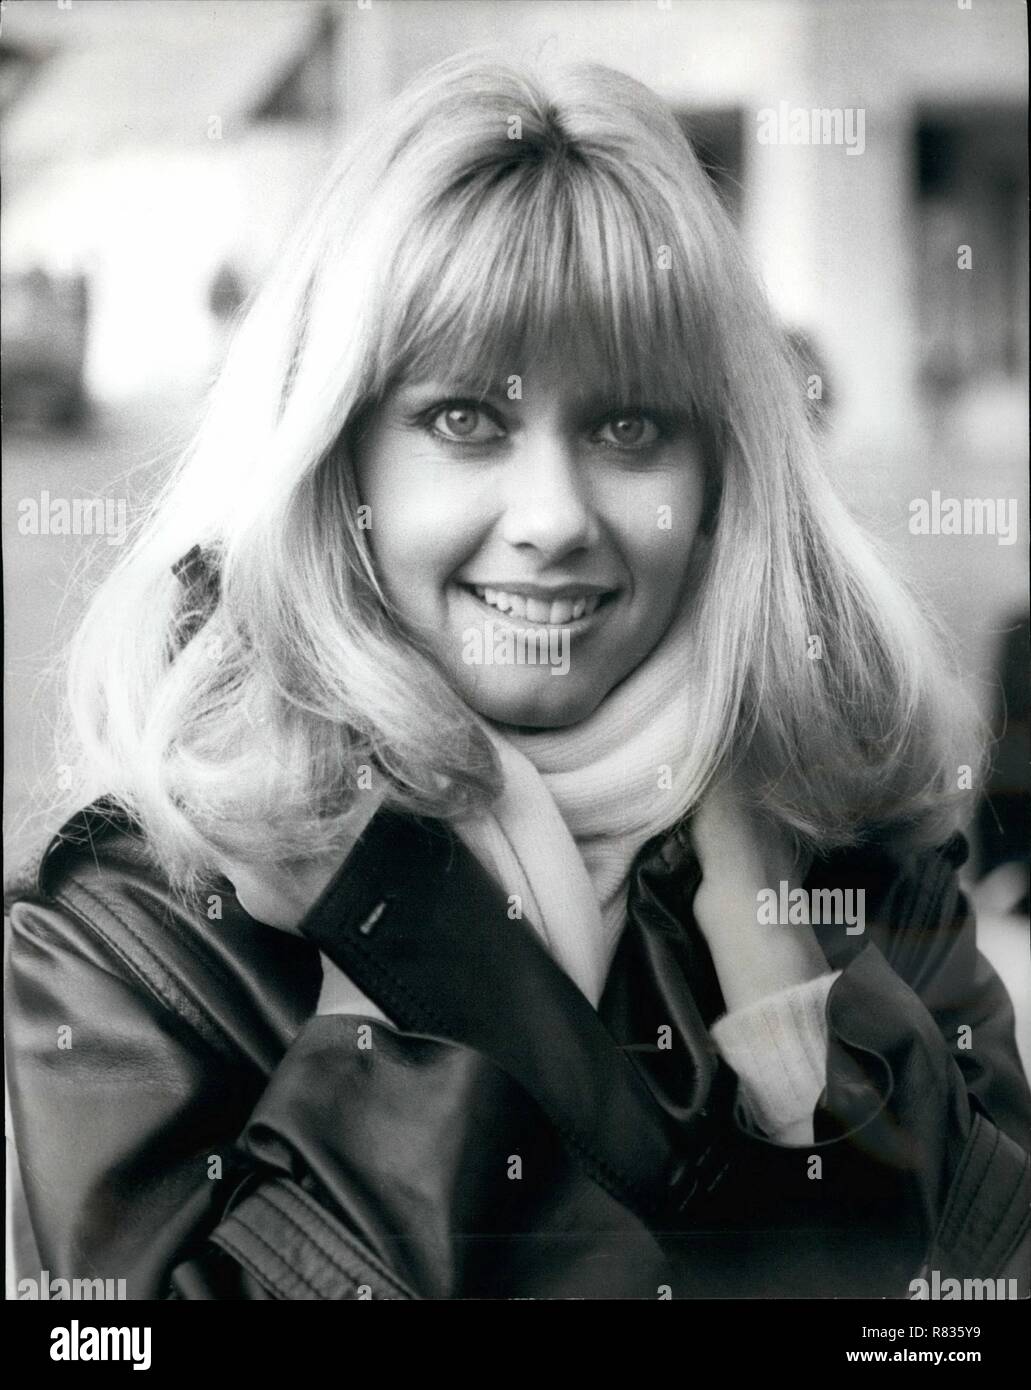 Nov. 11, 1978 - Olivia Newton-John press conference: Pop star Olivia Newton-John, the Grease film girl who has arrived back in Britain for a series of concert which open yesterday at the Rainbow theater. And she has also released her latest album called ''Totally Hot''. Photo shows Olivia Newton-John pictured at her press conference today. (Credit Image: © Keystone Press Agency/Keystone USA via ZUMAPRESS.com) Stock Photo